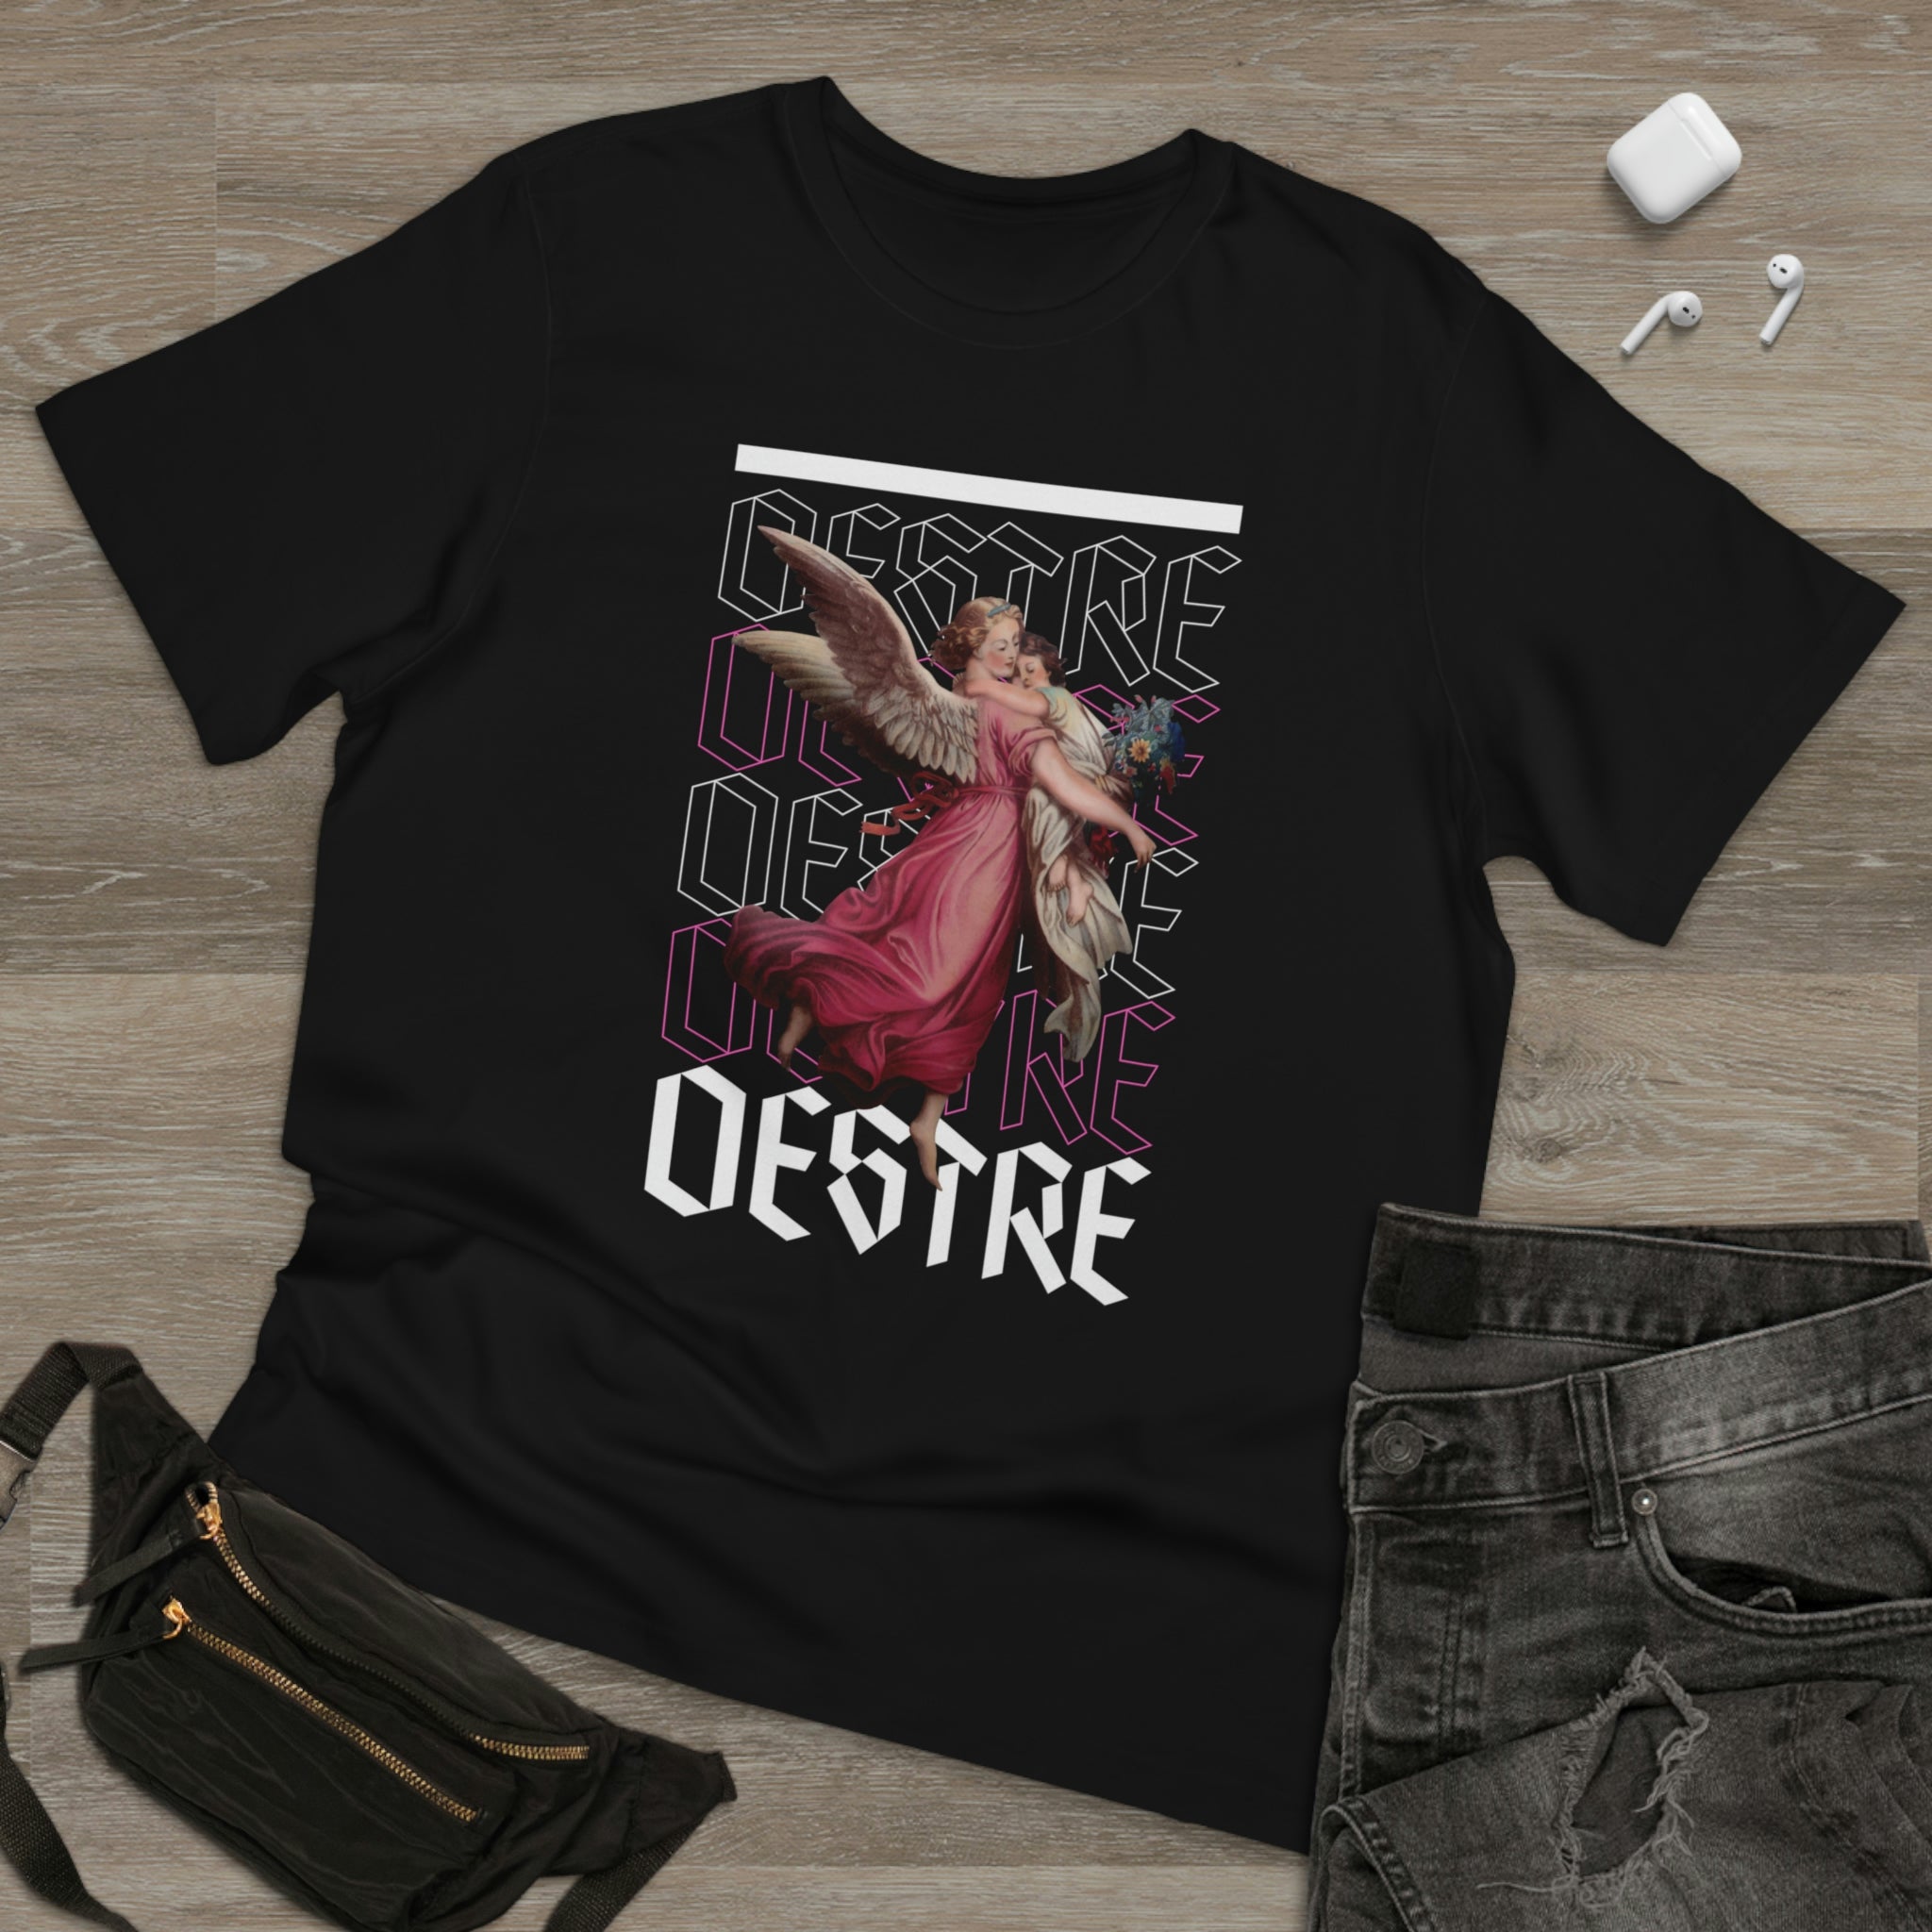 NSFW Collection Volume 3: Oestre Tee